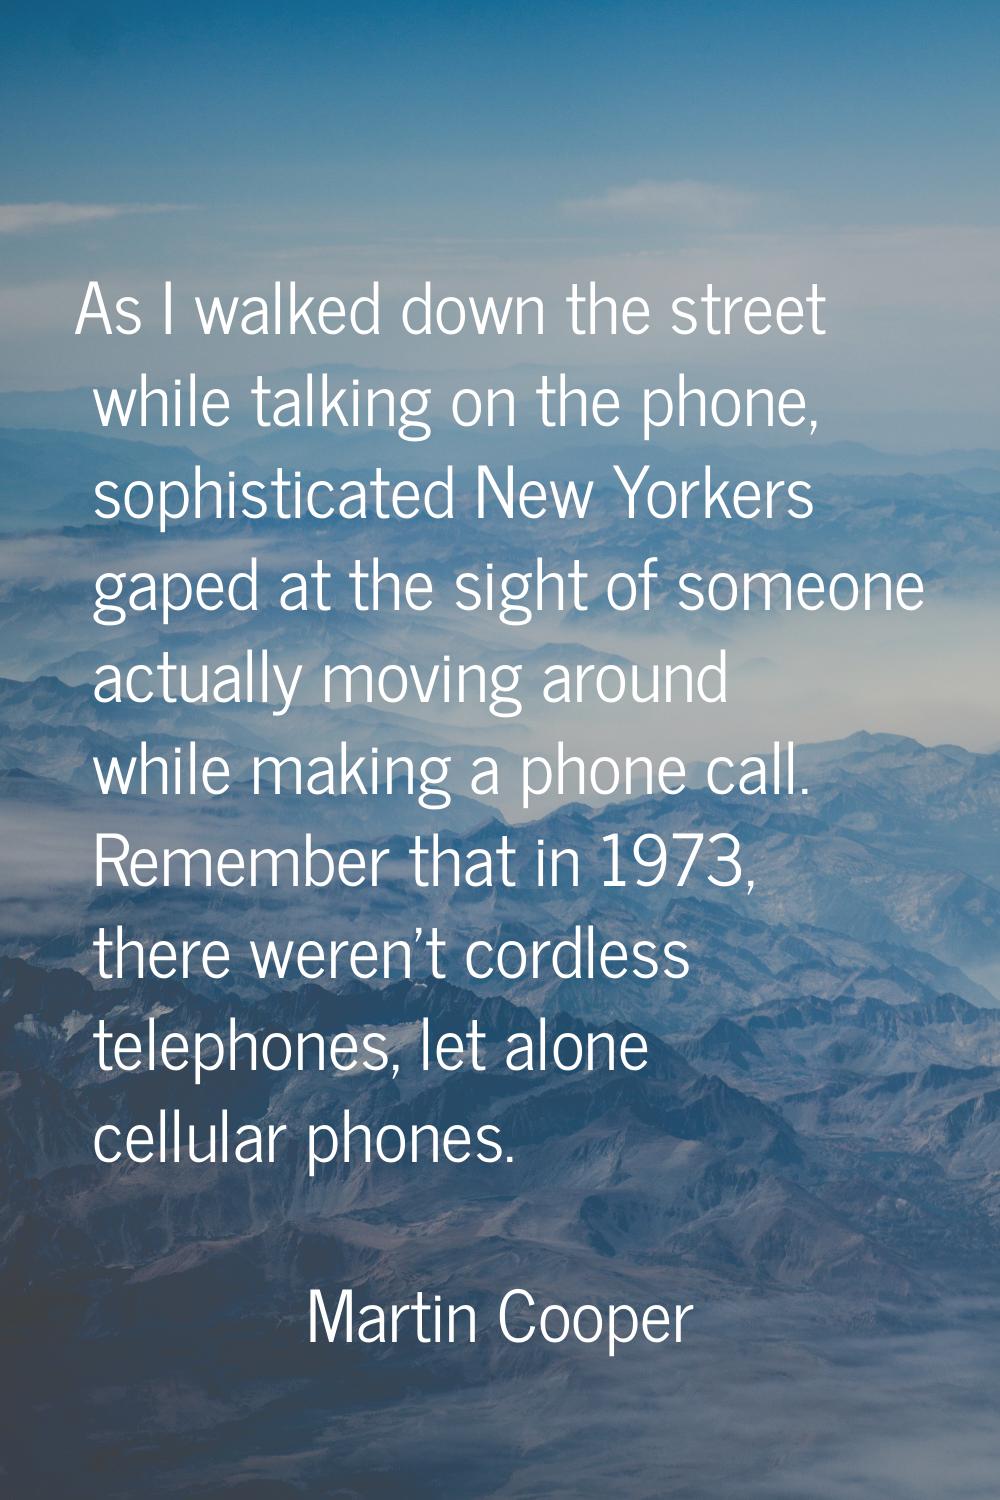 As I walked down the street while talking on the phone, sophisticated New Yorkers gaped at the sigh